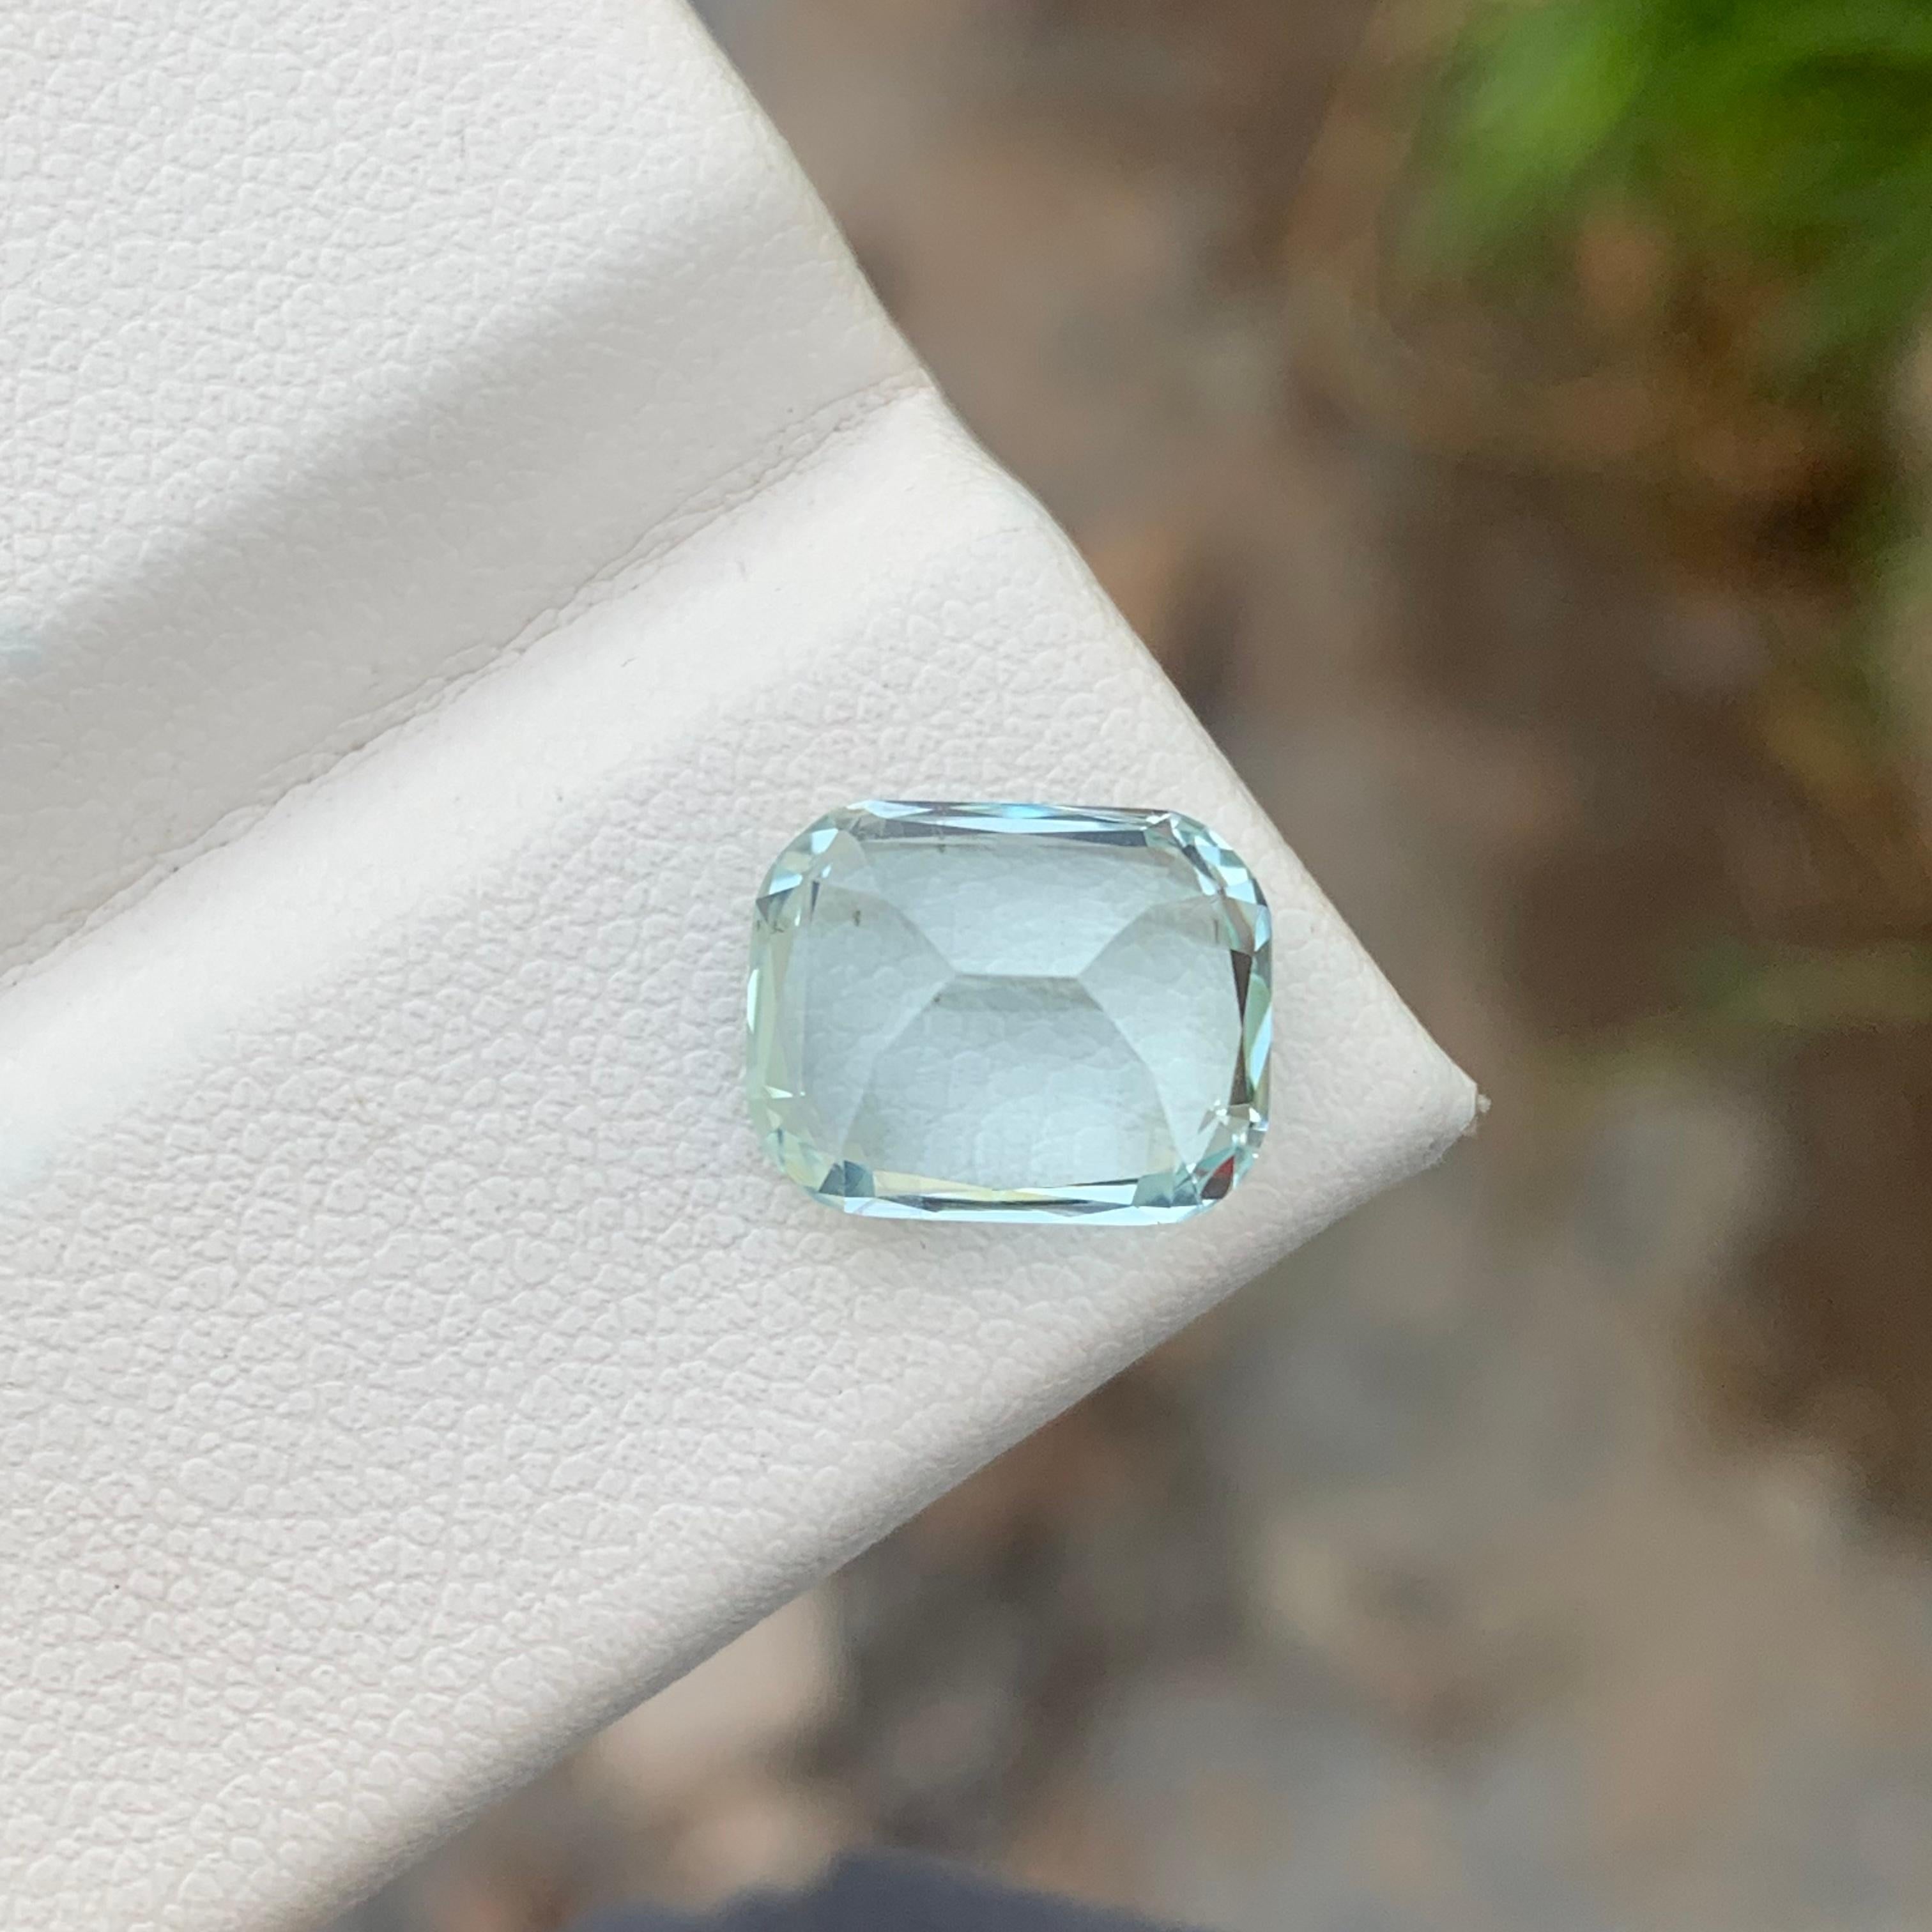 Men's 4.15 Carats Unheated Untreated Loose Aquamarine Ring Gem March Birthstone  For Sale